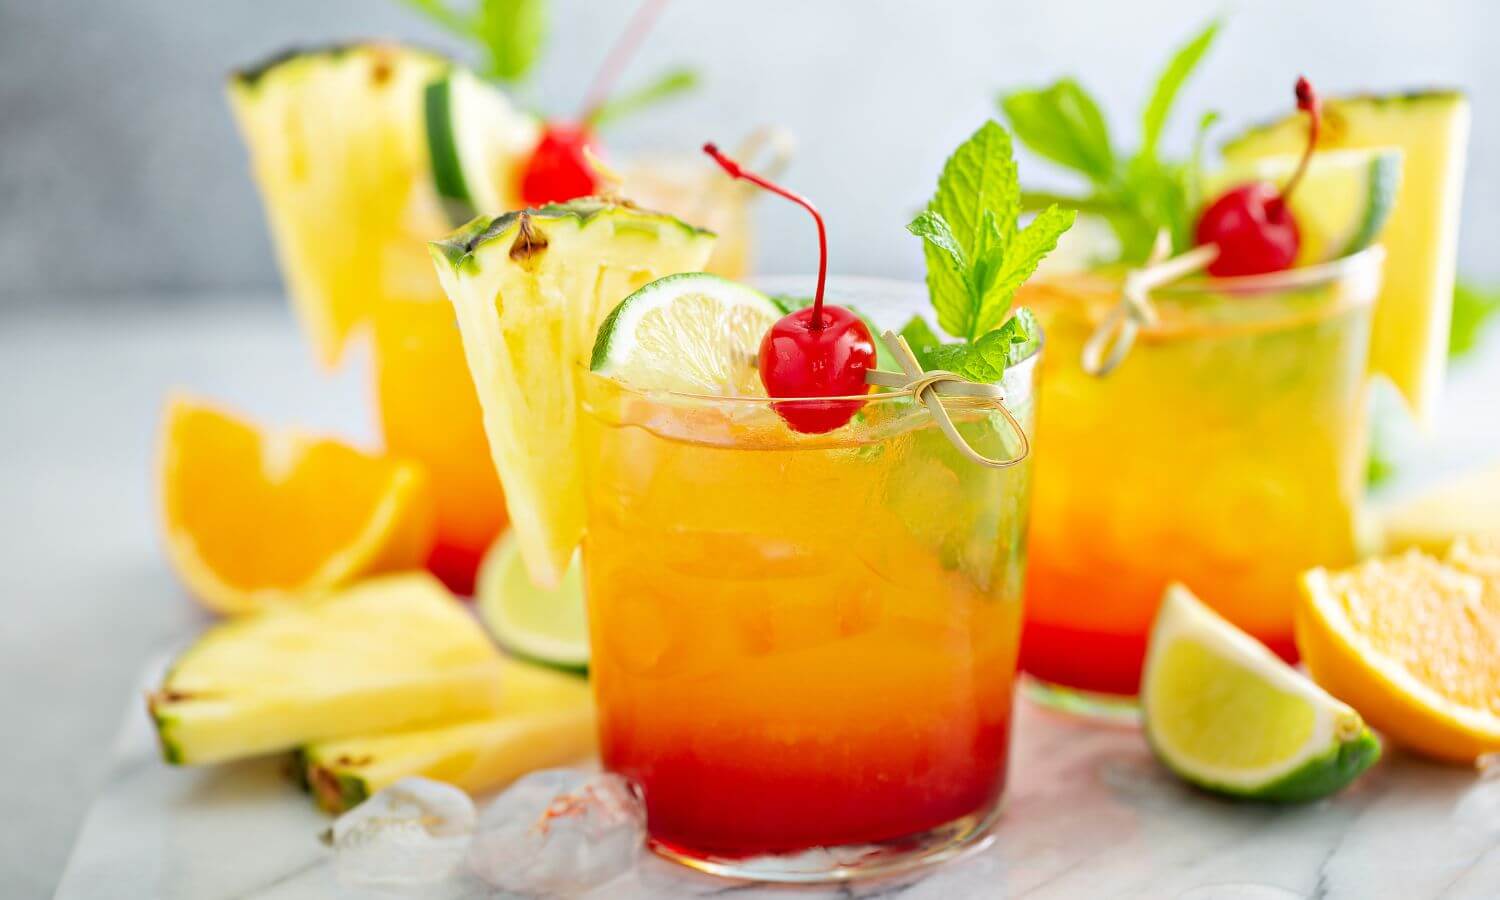 Tequila Sunrise, a classic tequila cocktail. These ones are garnished with pineapple, lime mint and a glacier cherry